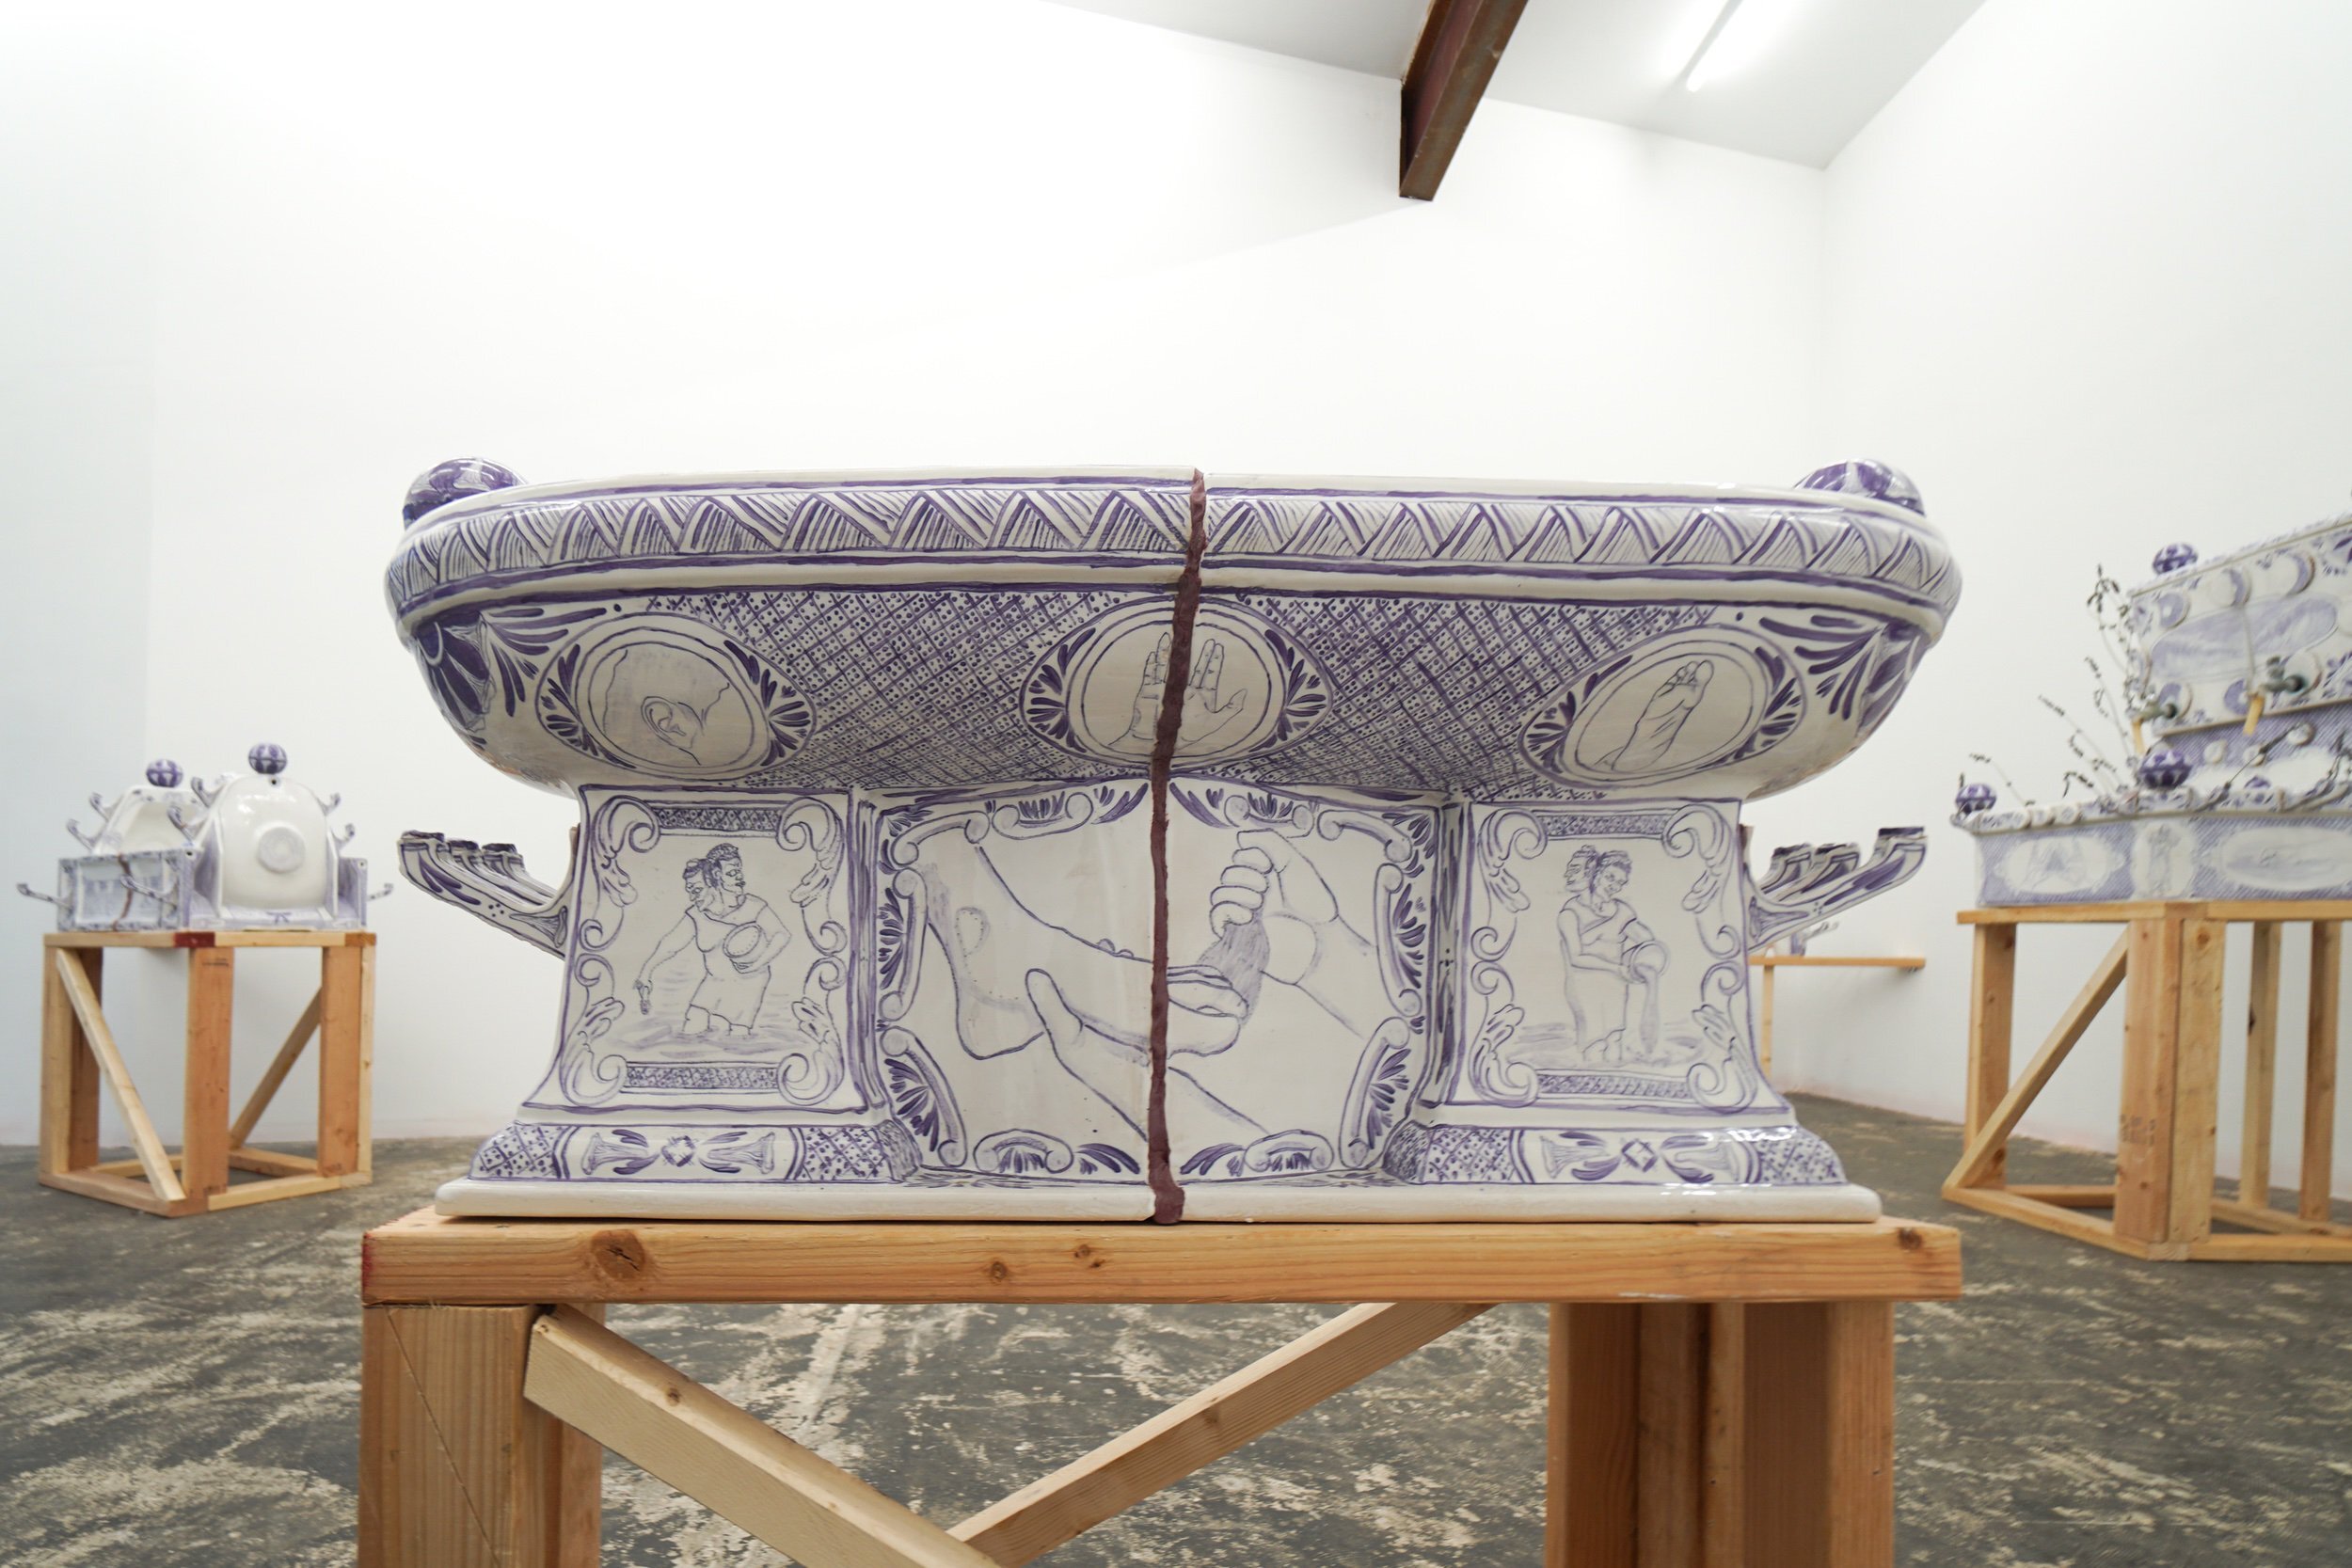  Nicki Green   Untitled (double bidet basin with faucets) , 2019 Glazed vitreous china  37 x 16 x 16 inches 